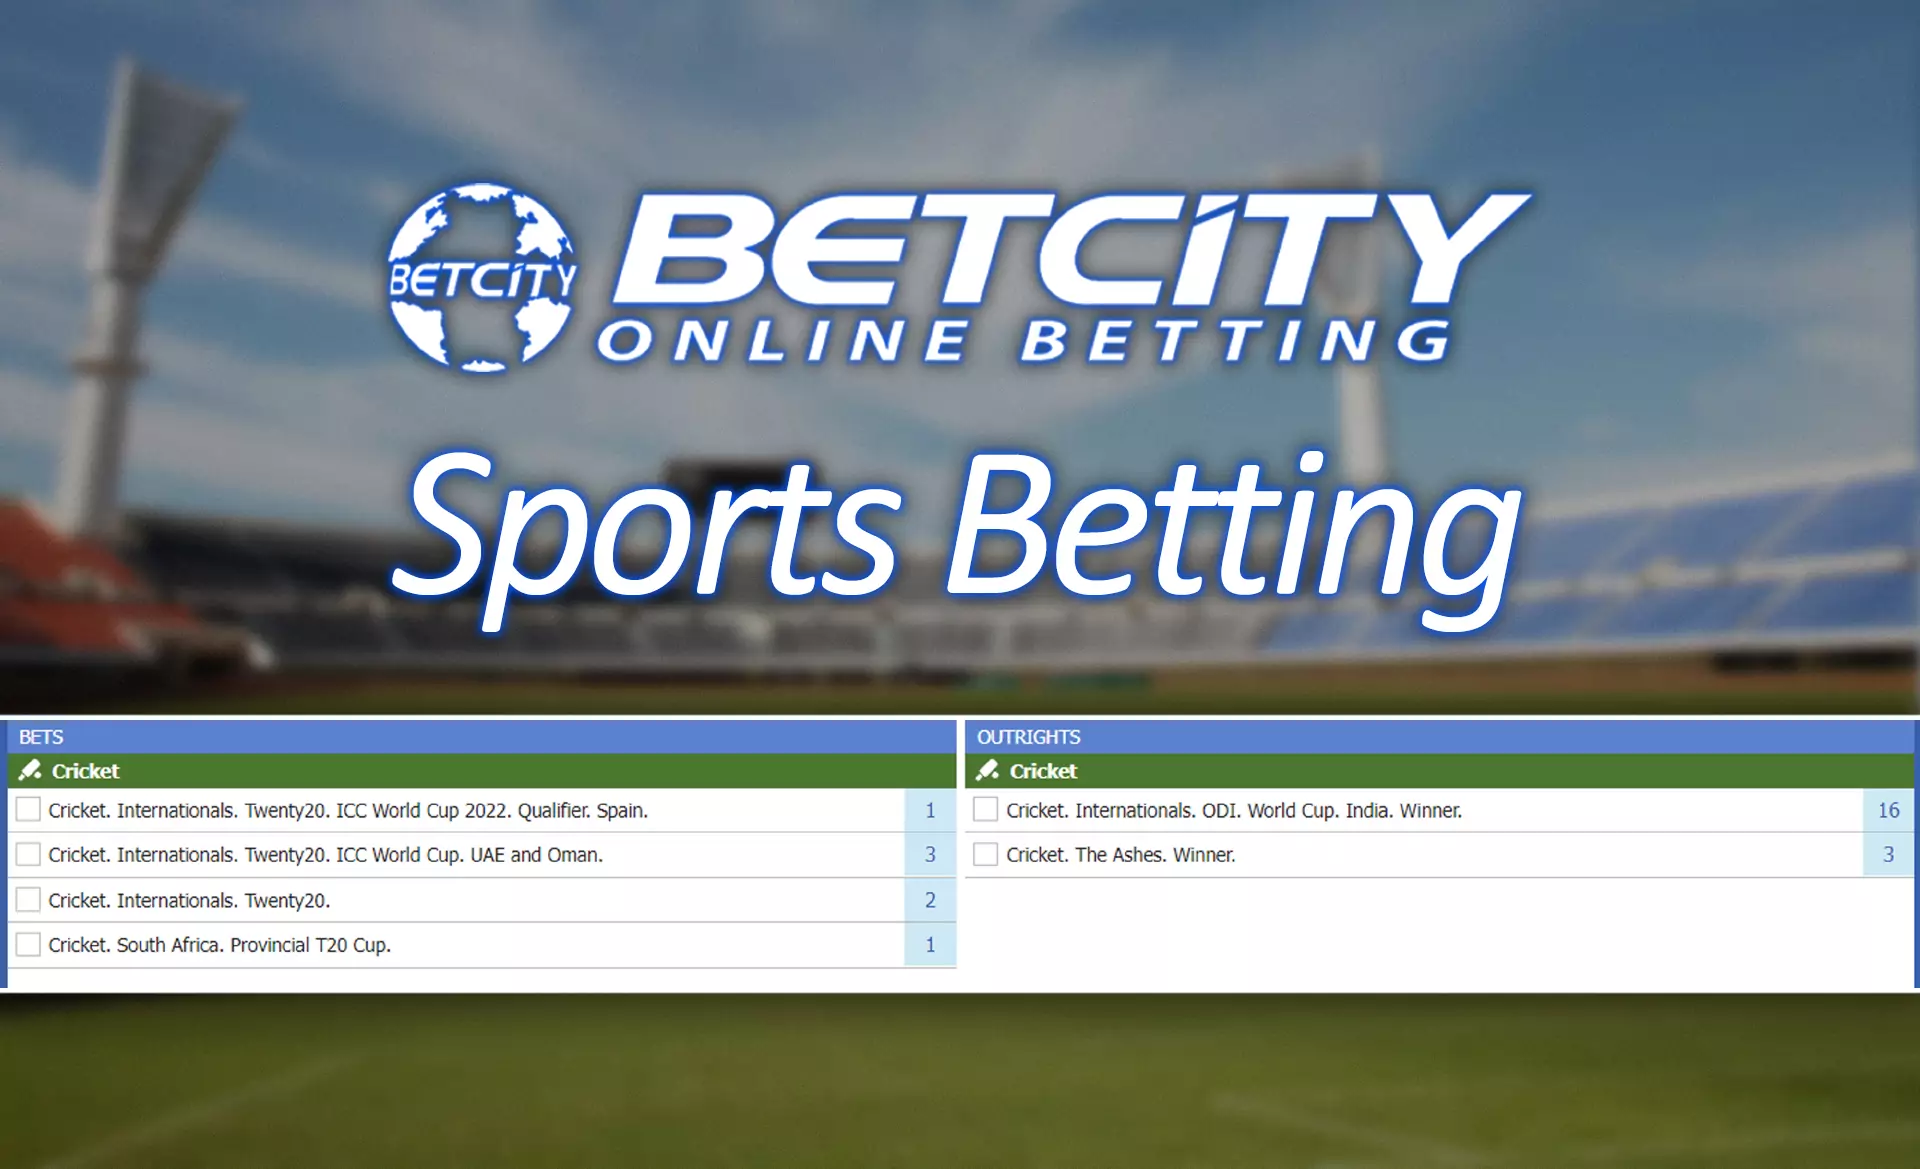 Sports fans would be glad to see the long list of sports disciplines and matches that they can place bets on at the Betcity.